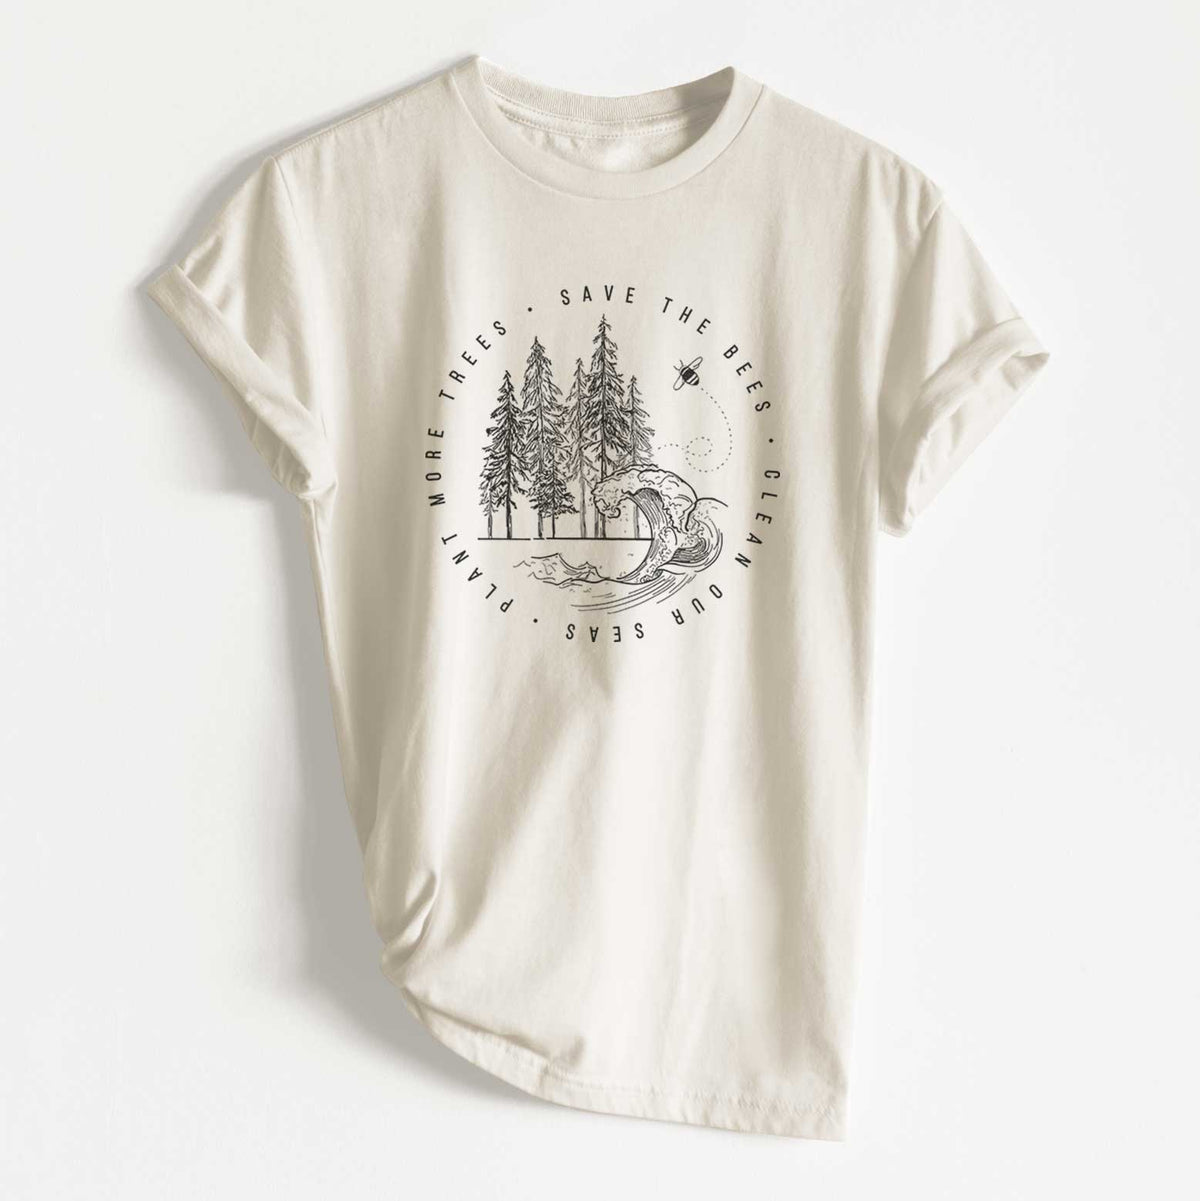 Save the Bees, Clean our Seas, Plant more Trees - Unisex Recycled Eco Tee  - CLOSEOUT - FINAL SALE